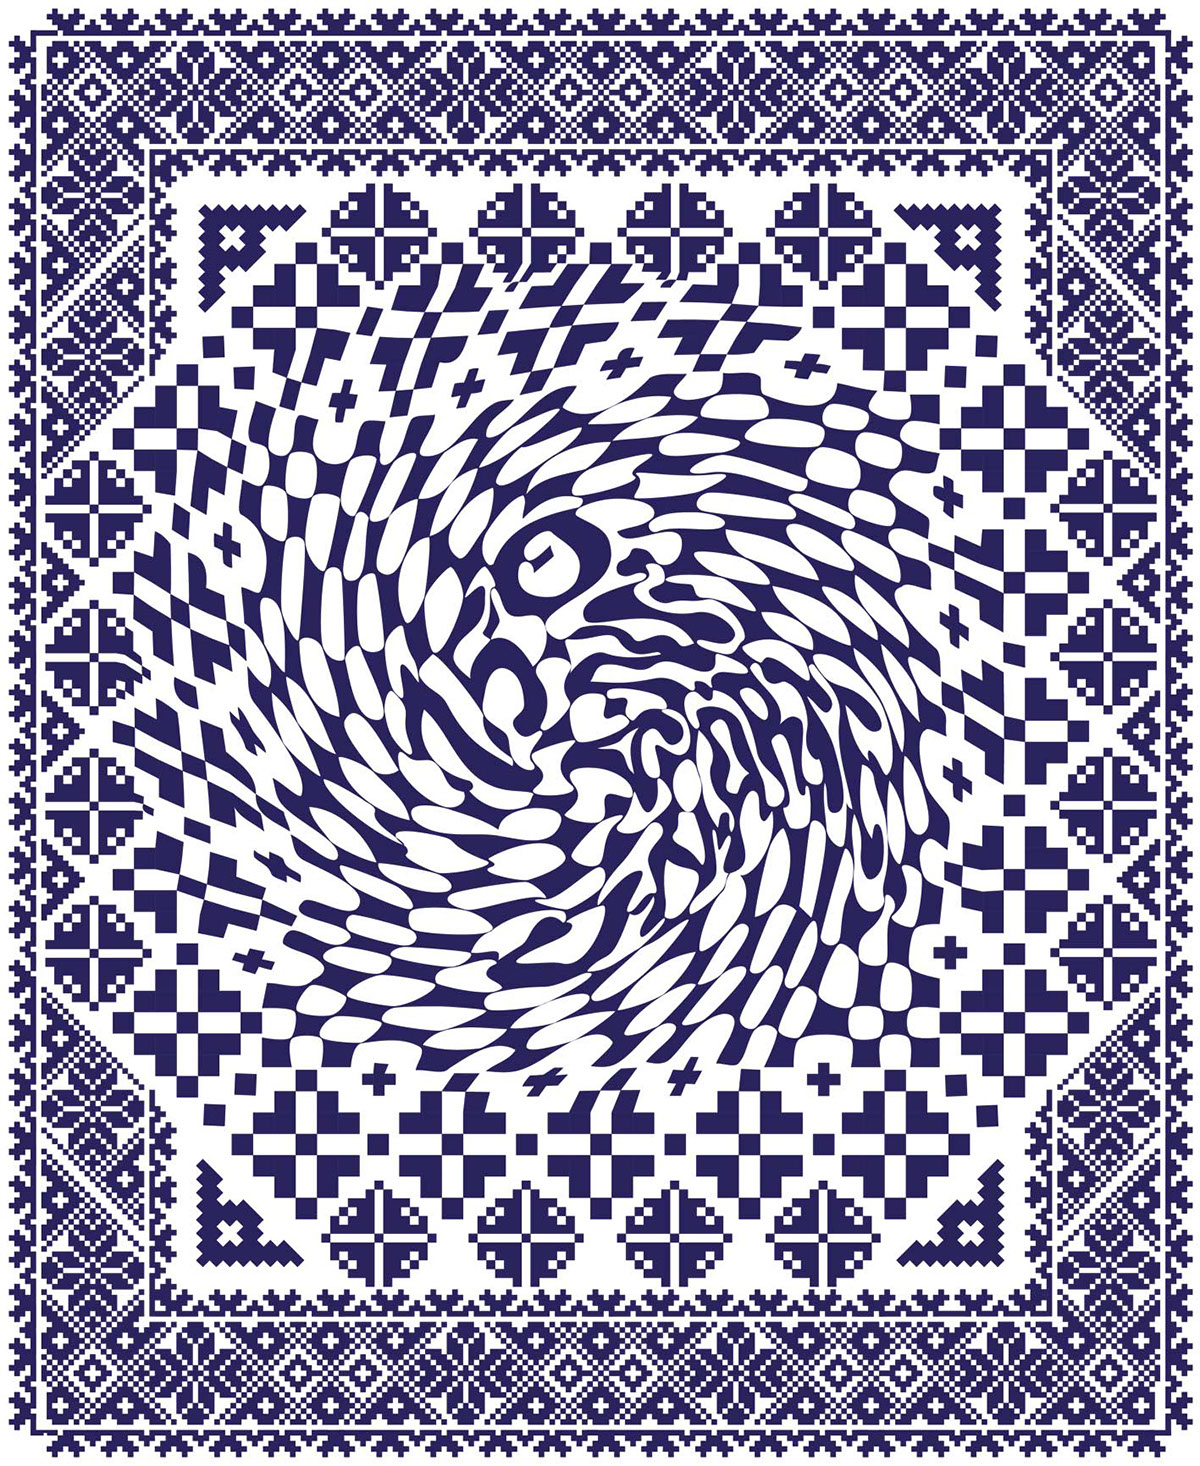  poster  print  vortex  illusion  op art optical illusion anniversary stamps TRADITIONAL ART romanian